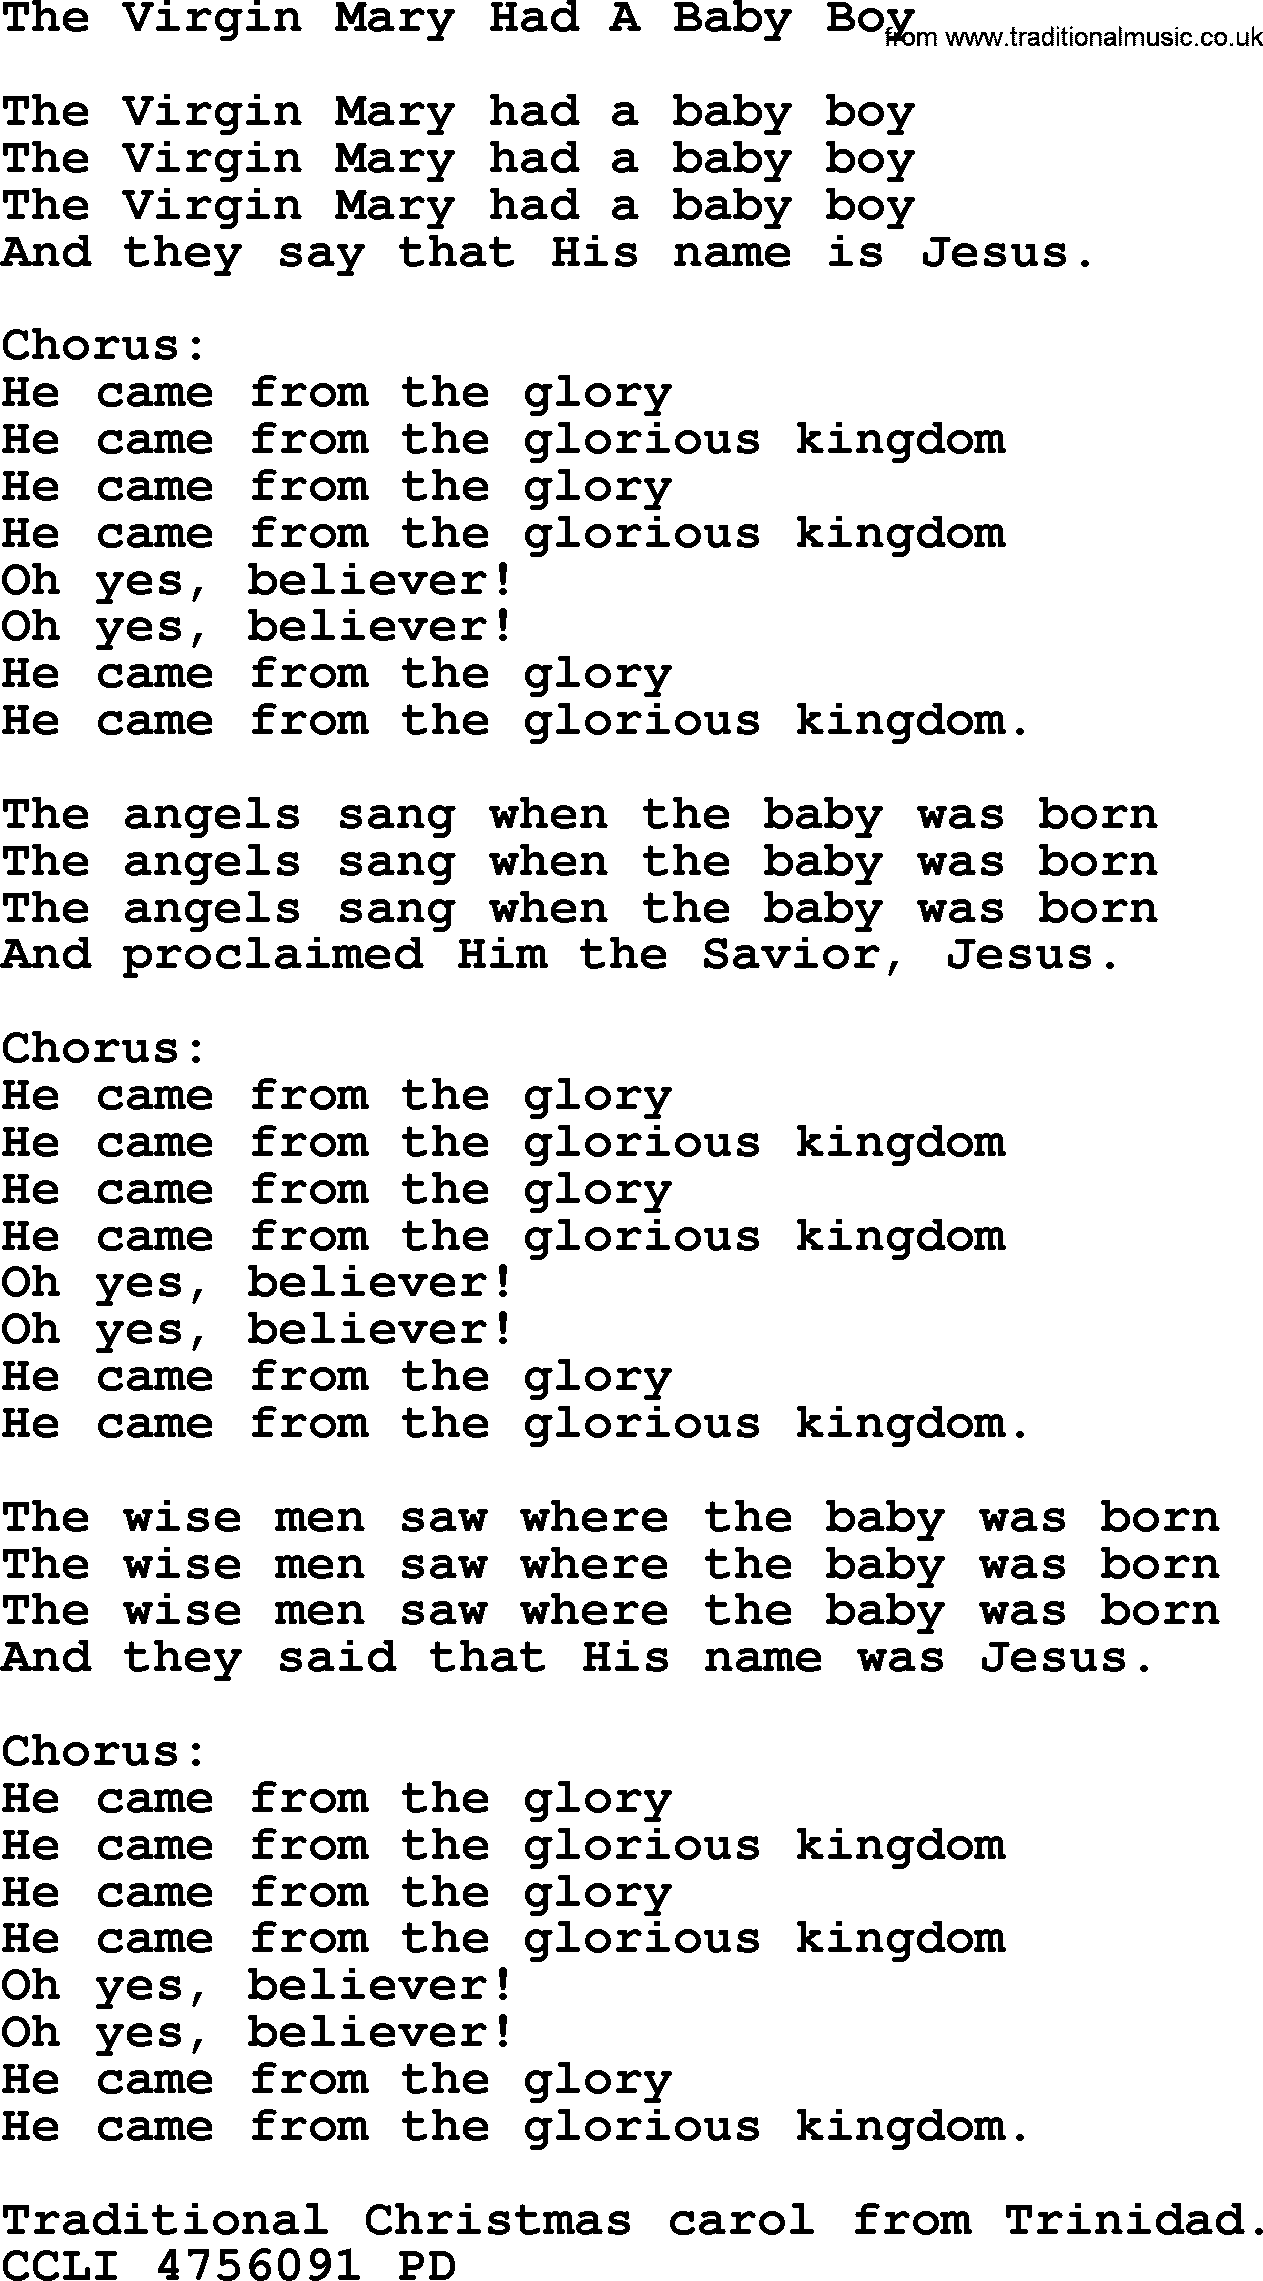 Christmas Powerpoints, Song: The Virgin Mary Had A Baby Boy - Lyrics, PPT(for church projection ...